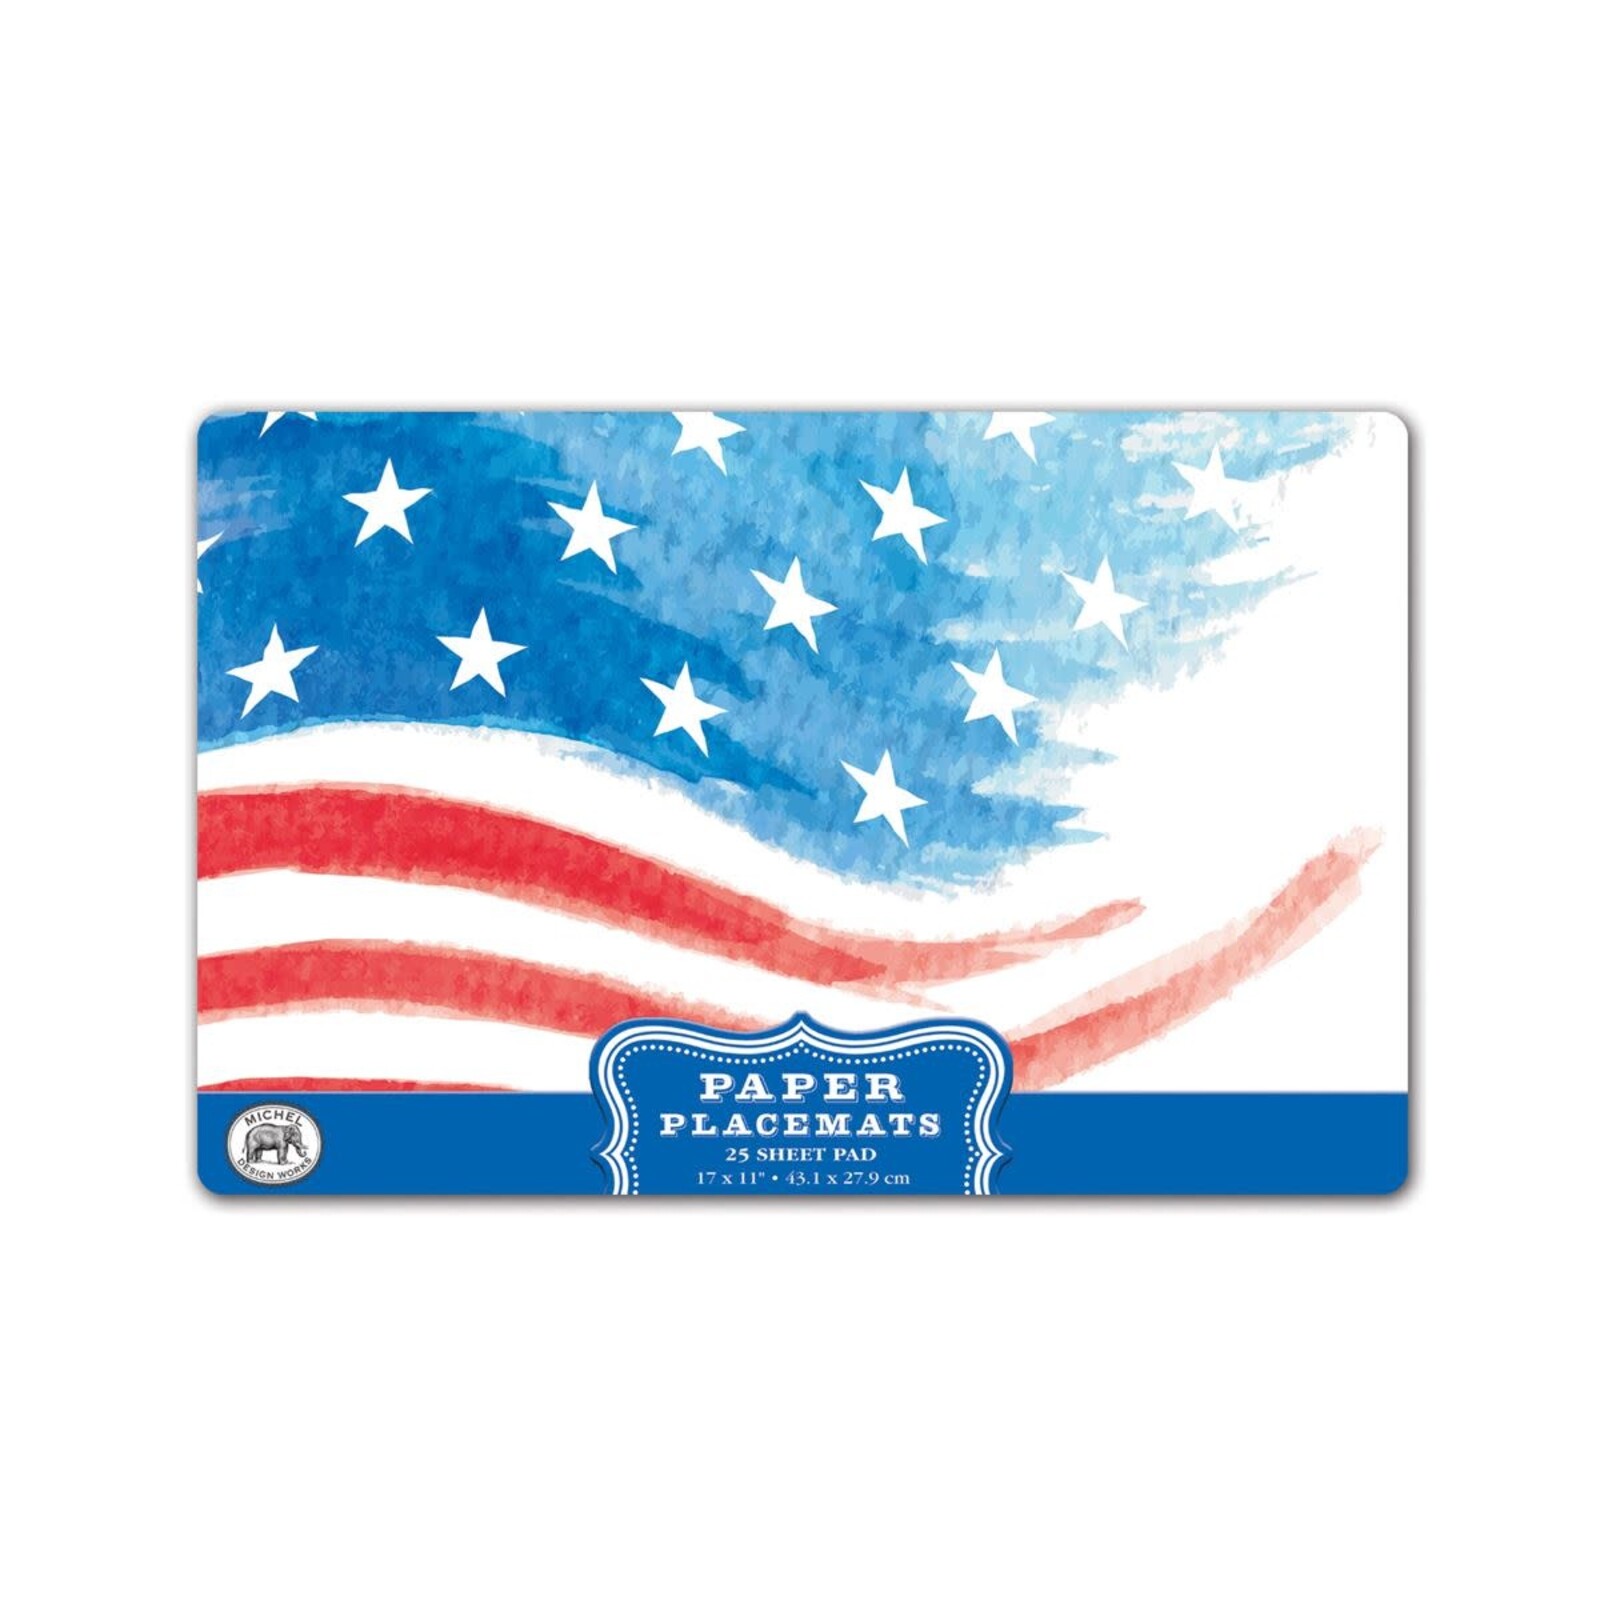 Michel Design Works Placemats Red, White & Blue Paper Placemats   PM343 loading=